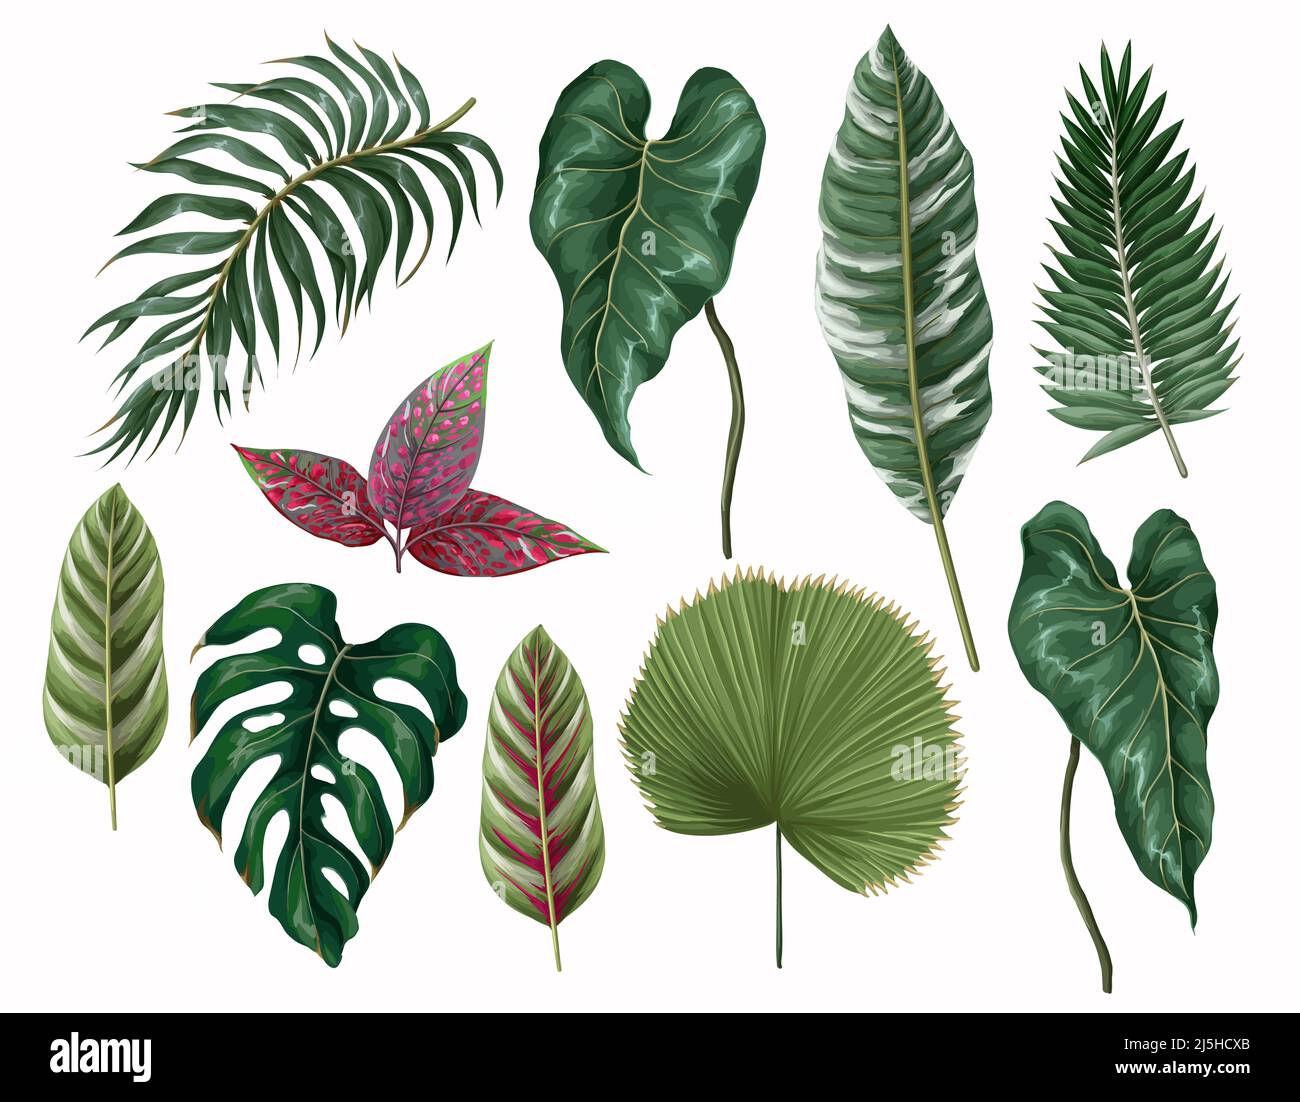 Tropical leaves such as monstera, palm, leaf, calathea and other ...